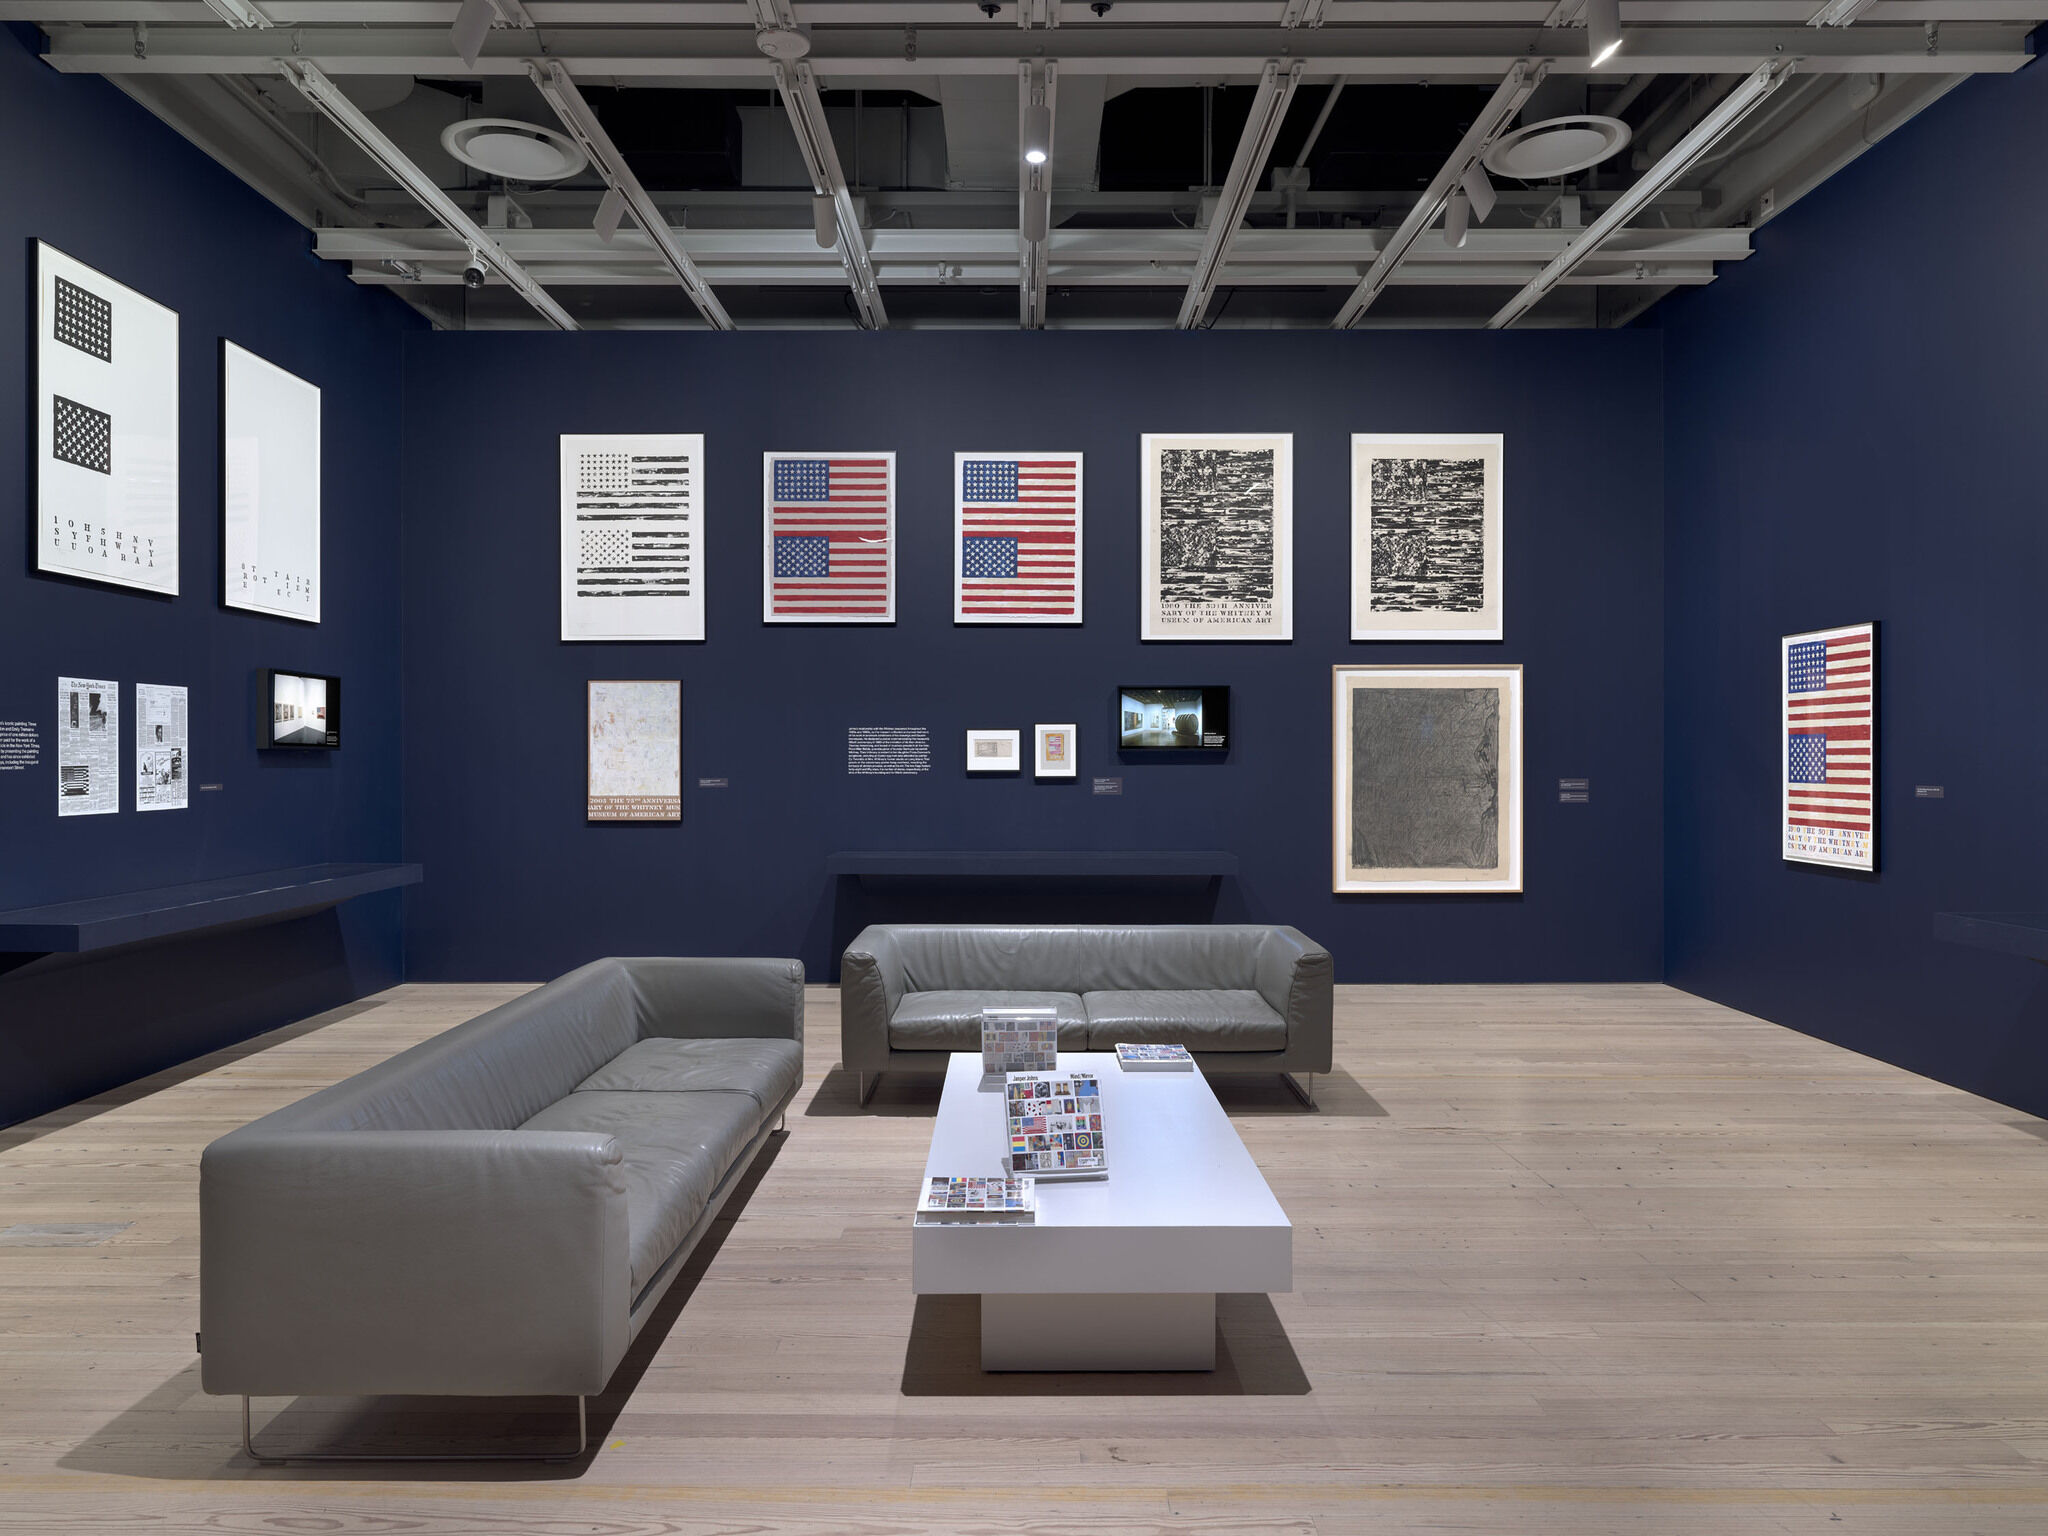 A dark blue exhibition room with a series of printed materials framed on the walls.